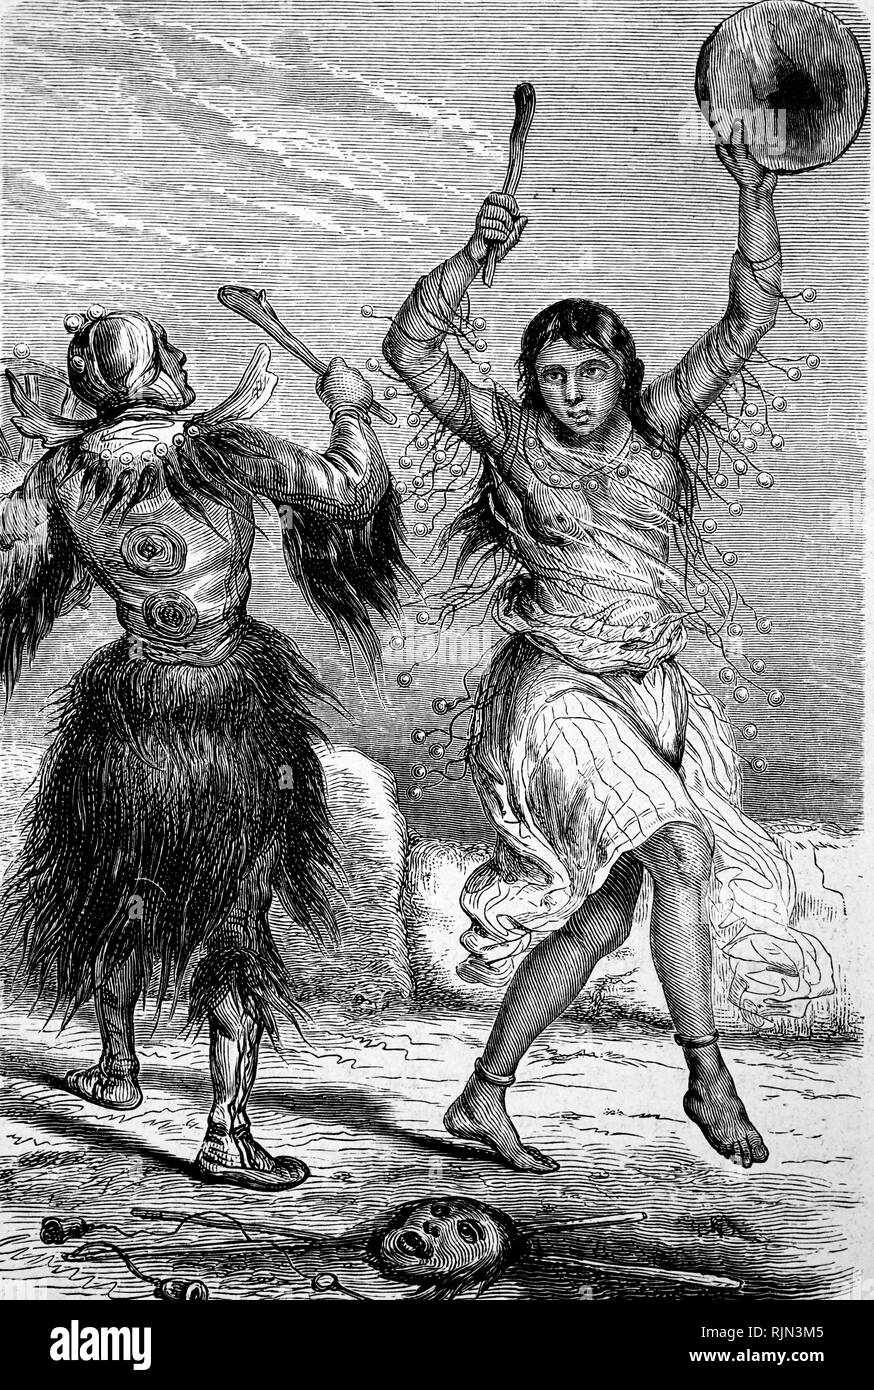 Illustration showing ARCTIC AND TUNDRA REGIONS Ritual shaman dance. From a late 19th century French engraving Stock Photo